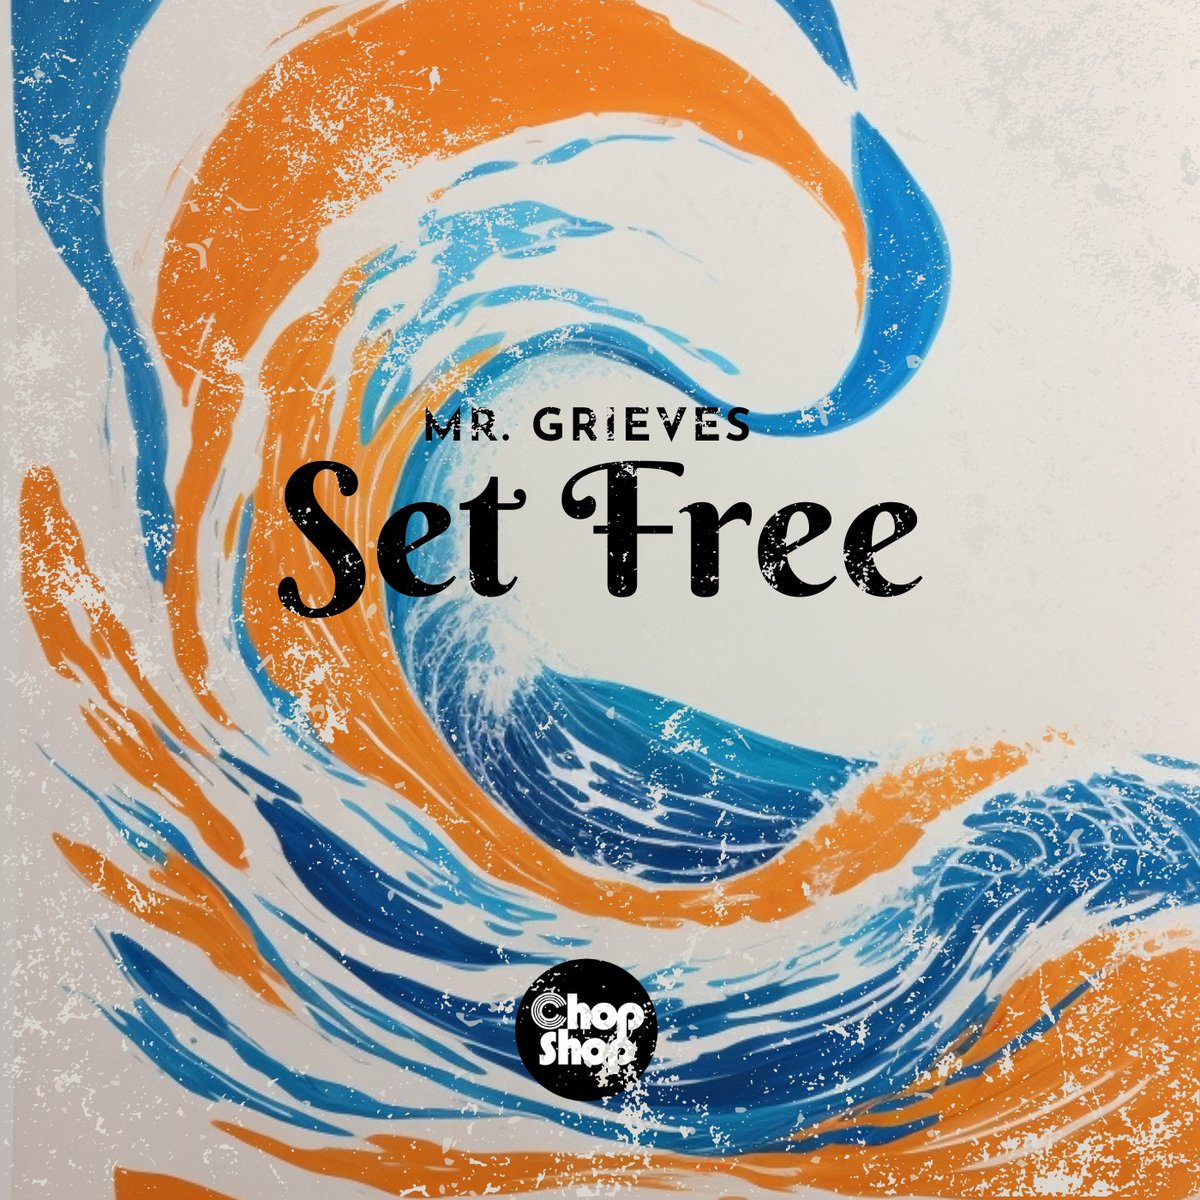 Mesmerizing Chill grooves from Mr Grieves debut on Chopshop Music. 'Set Free' with his essential balearic vibes and choose between the original or ambient mix. 🌴🌞 #chillmusic #balearic #downtempo #chopshopmusic